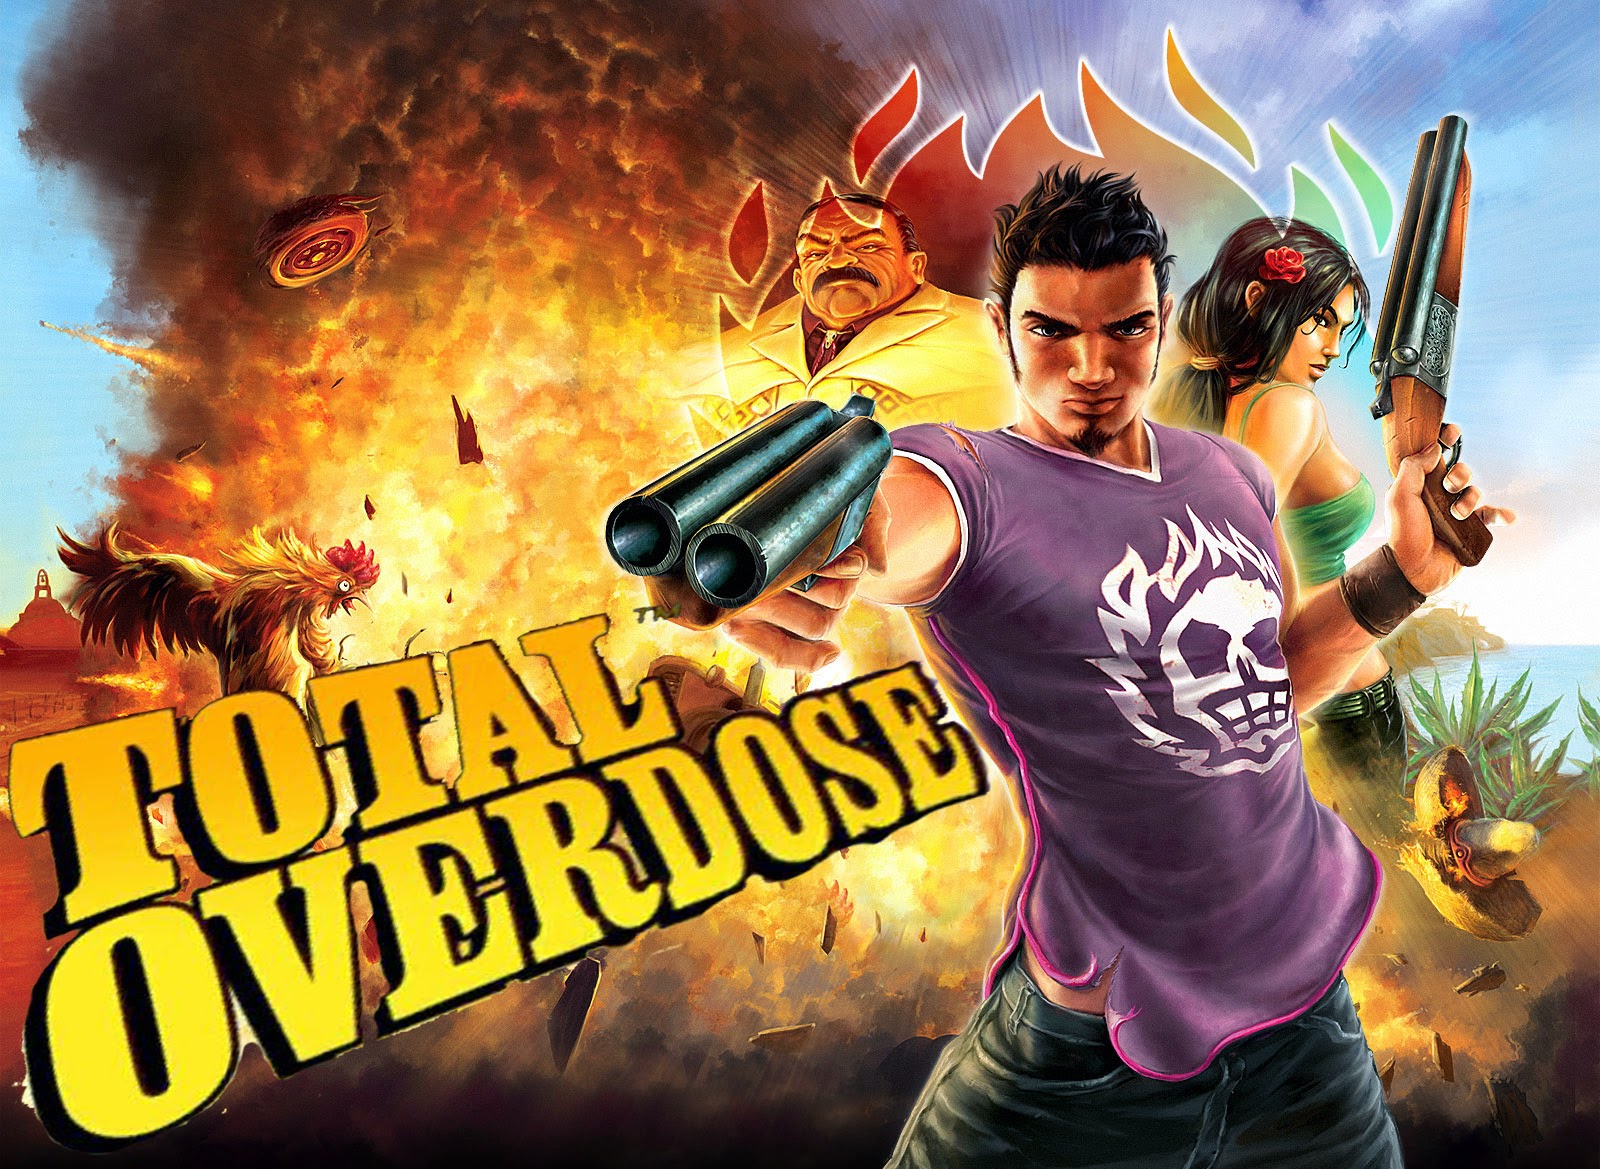 total overdose 2 download full version in french